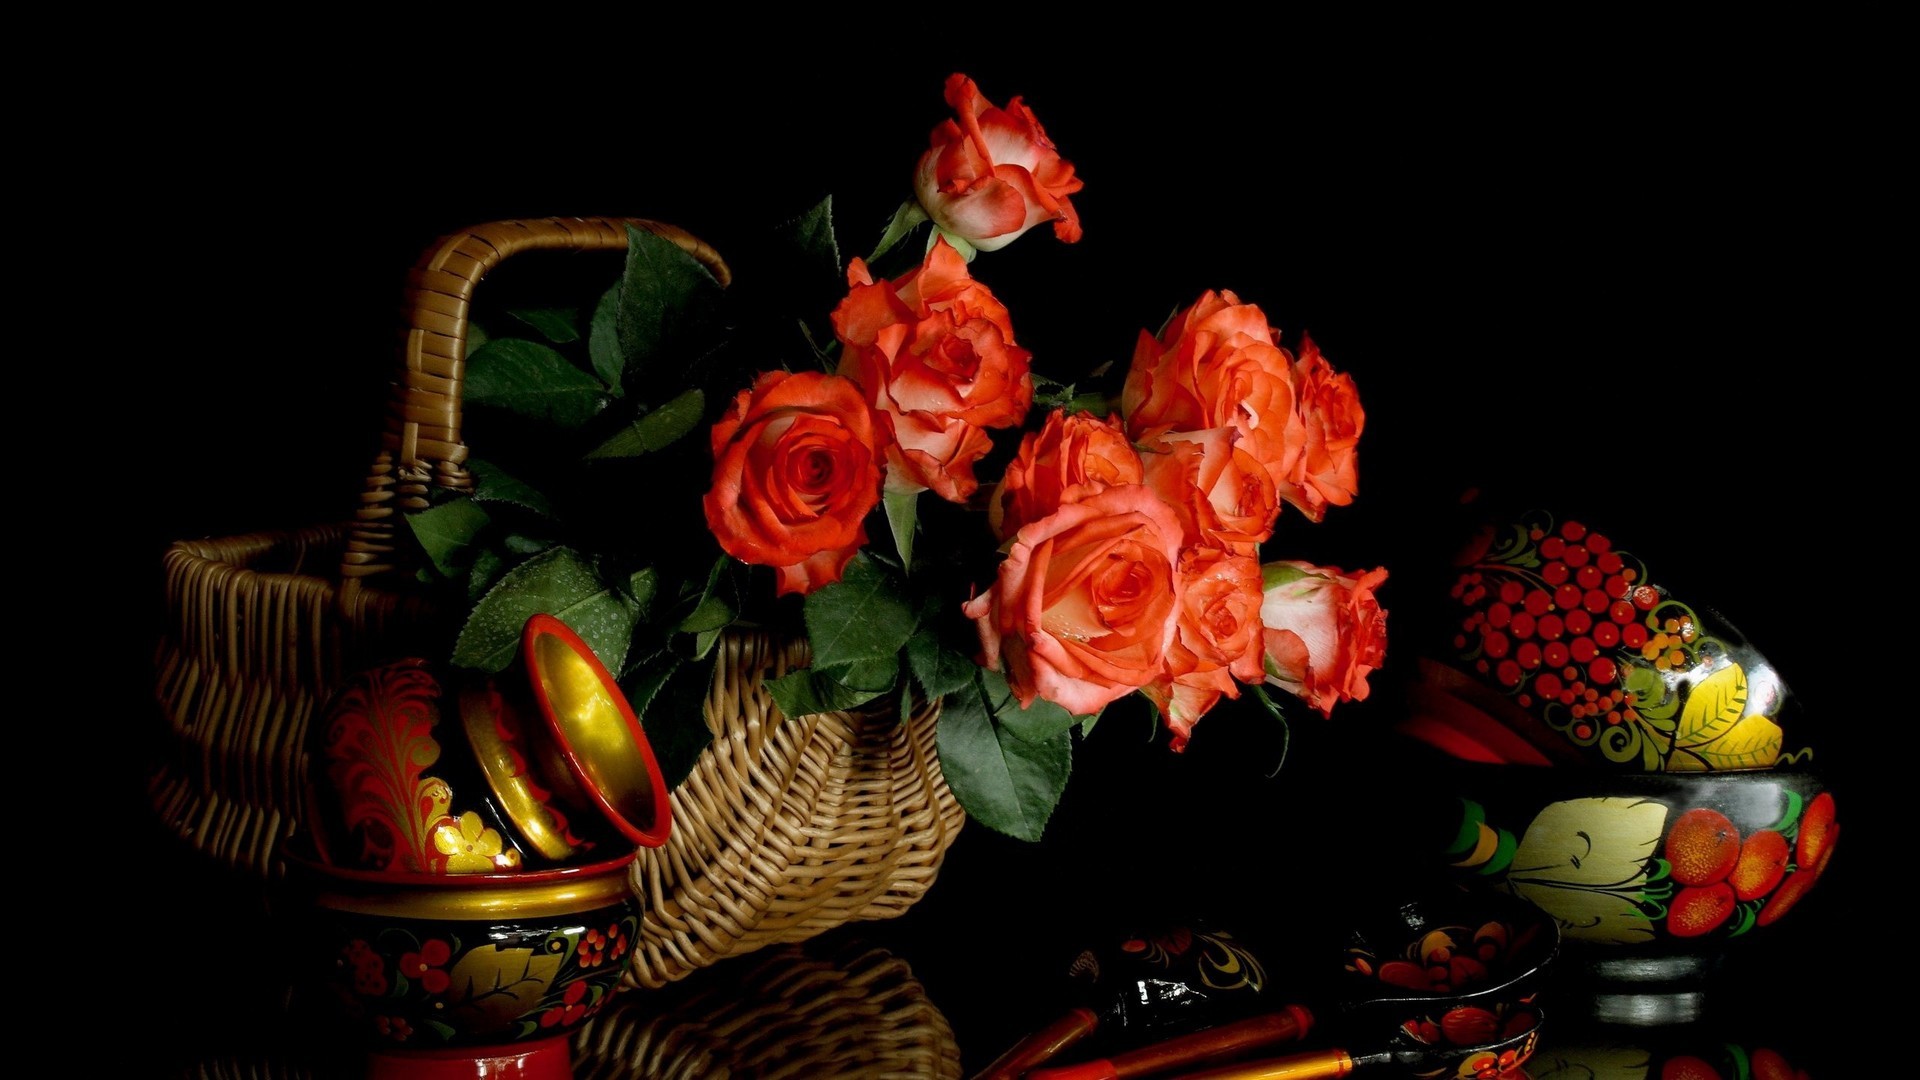 Flowers Wooden Spoons Dishes Still Life Wallpaper Background - HD Wallpaper 